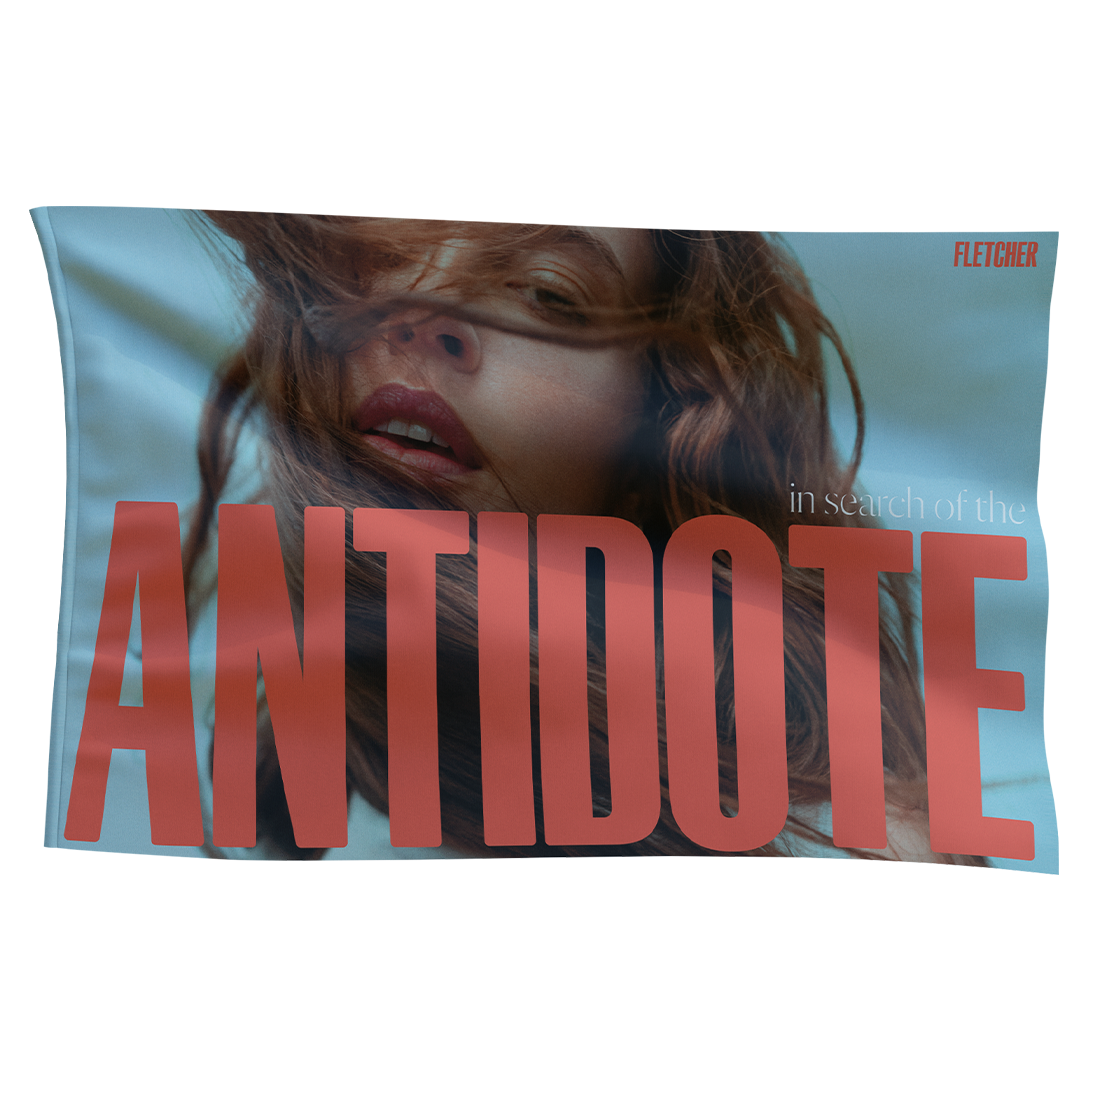 FLETCHER - In Search of the Antidote Flag